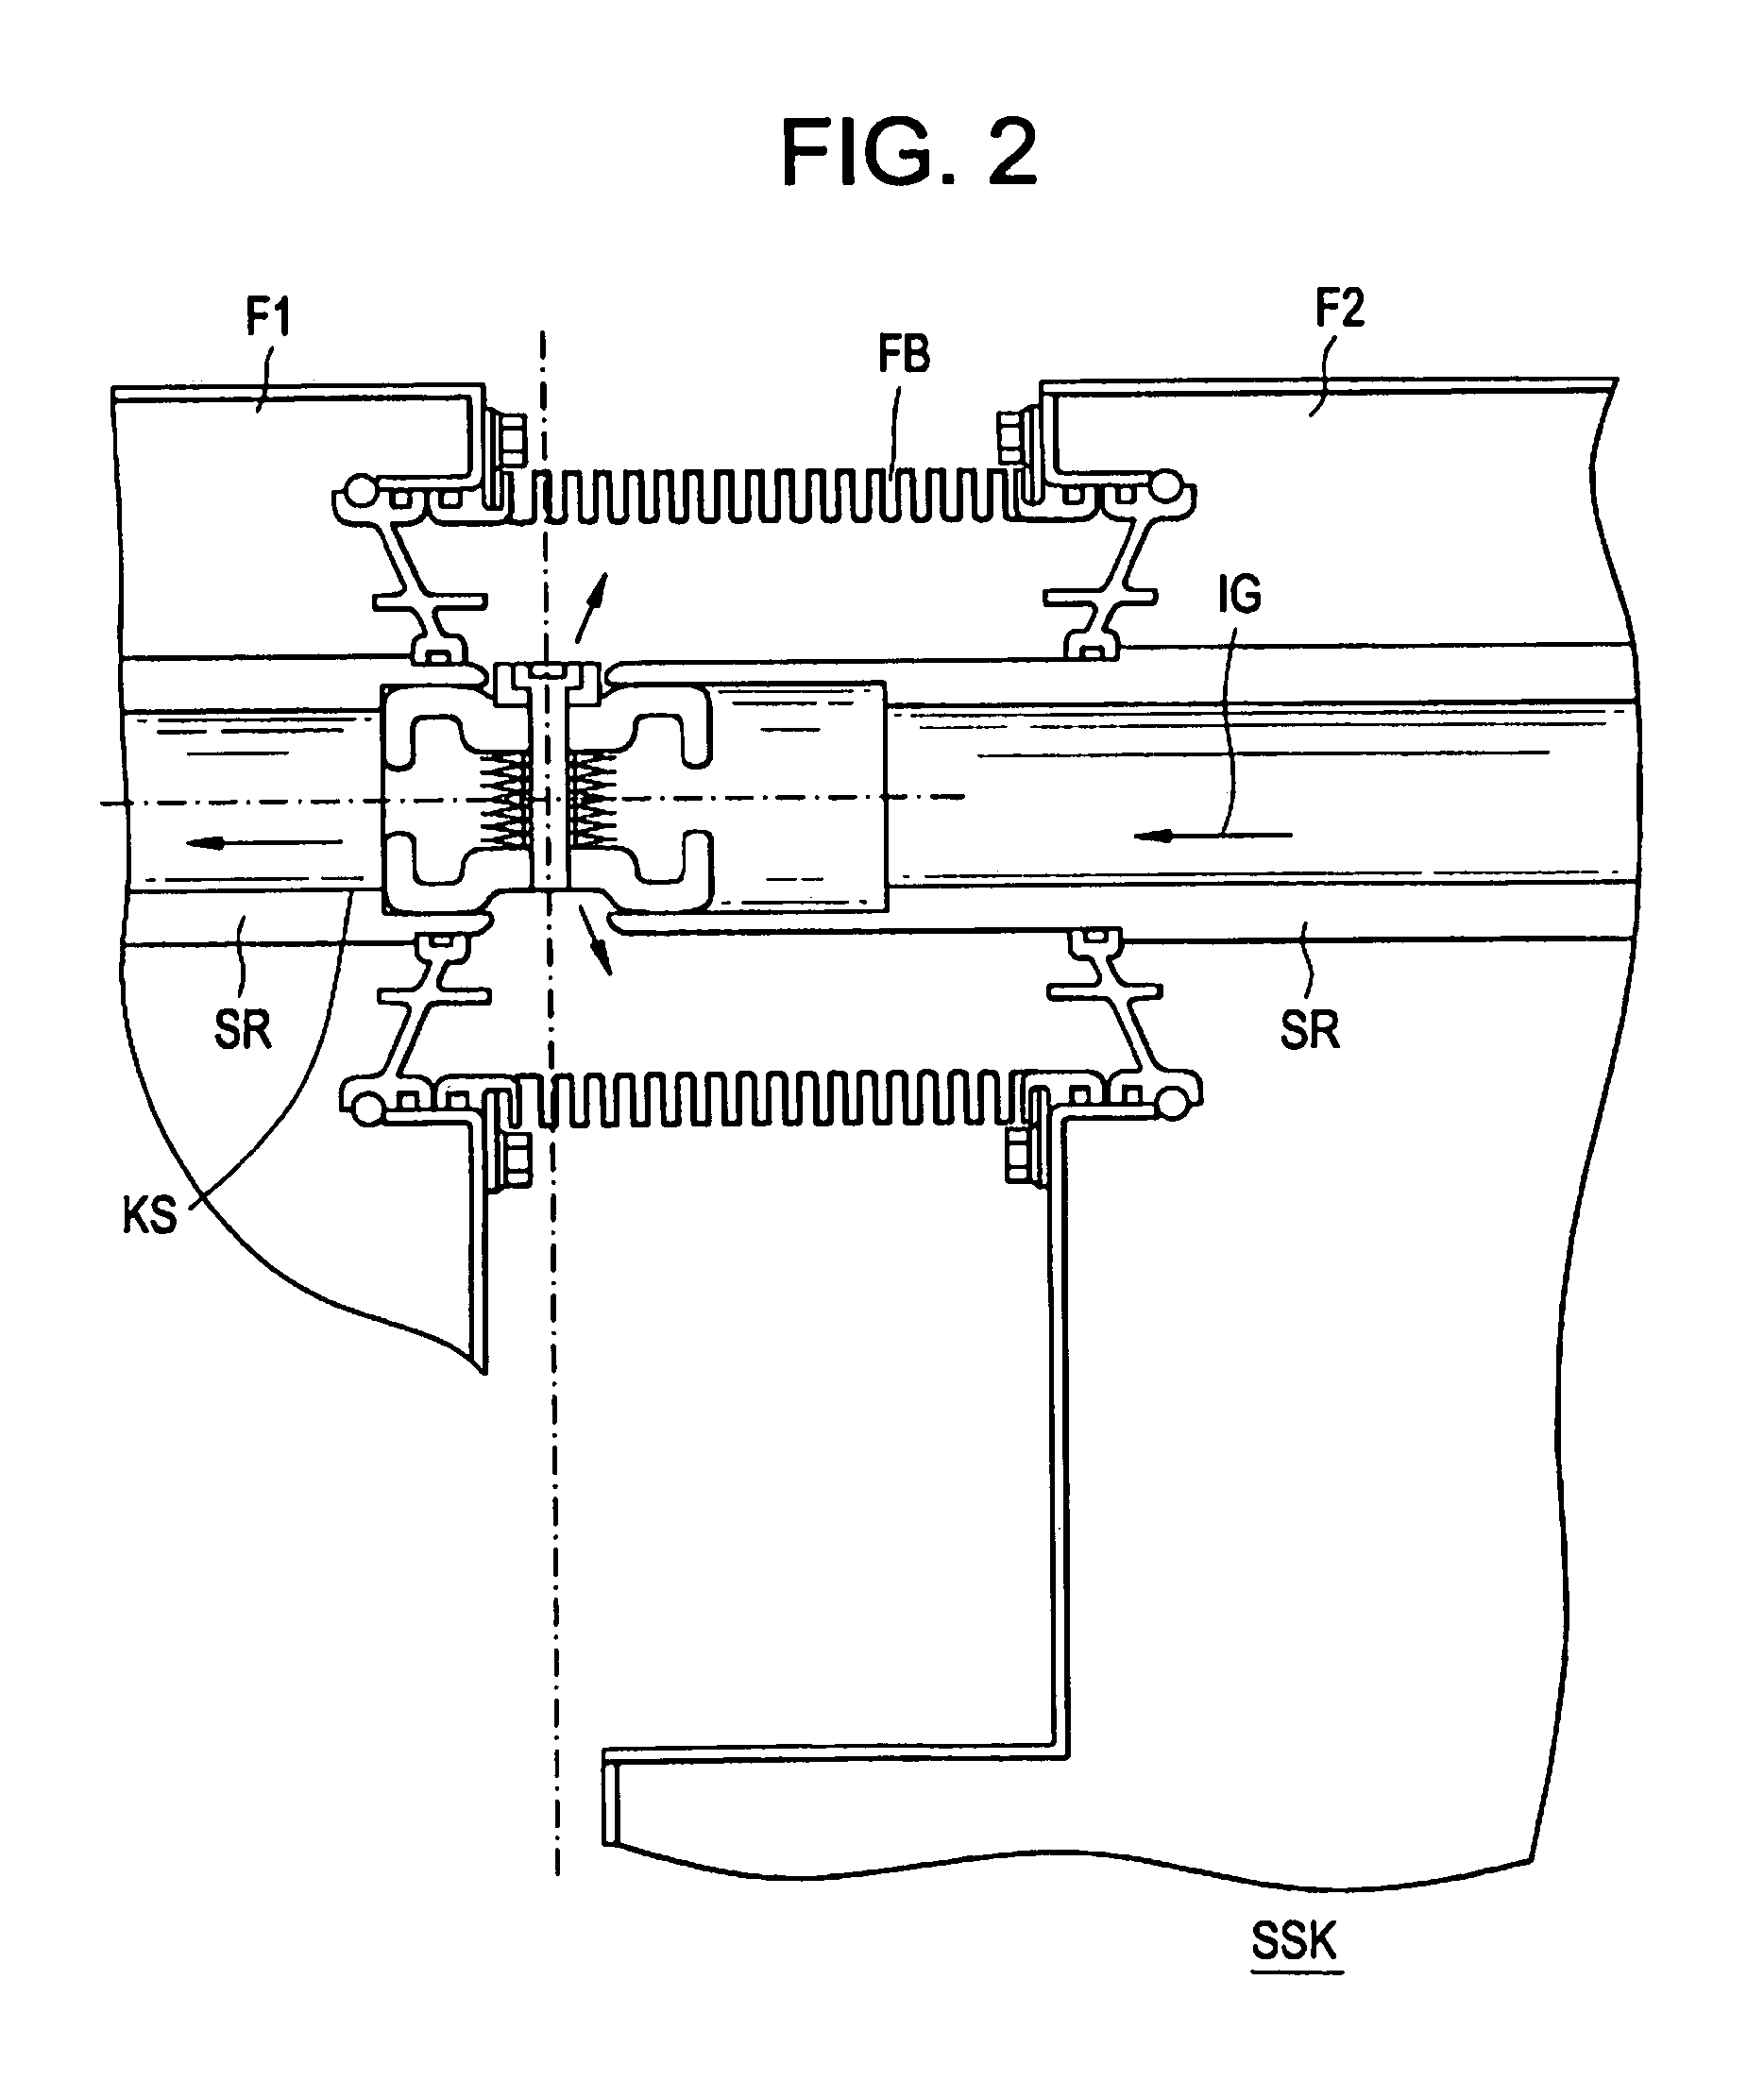 Bus bar connection for a gas-insulated switchboard system